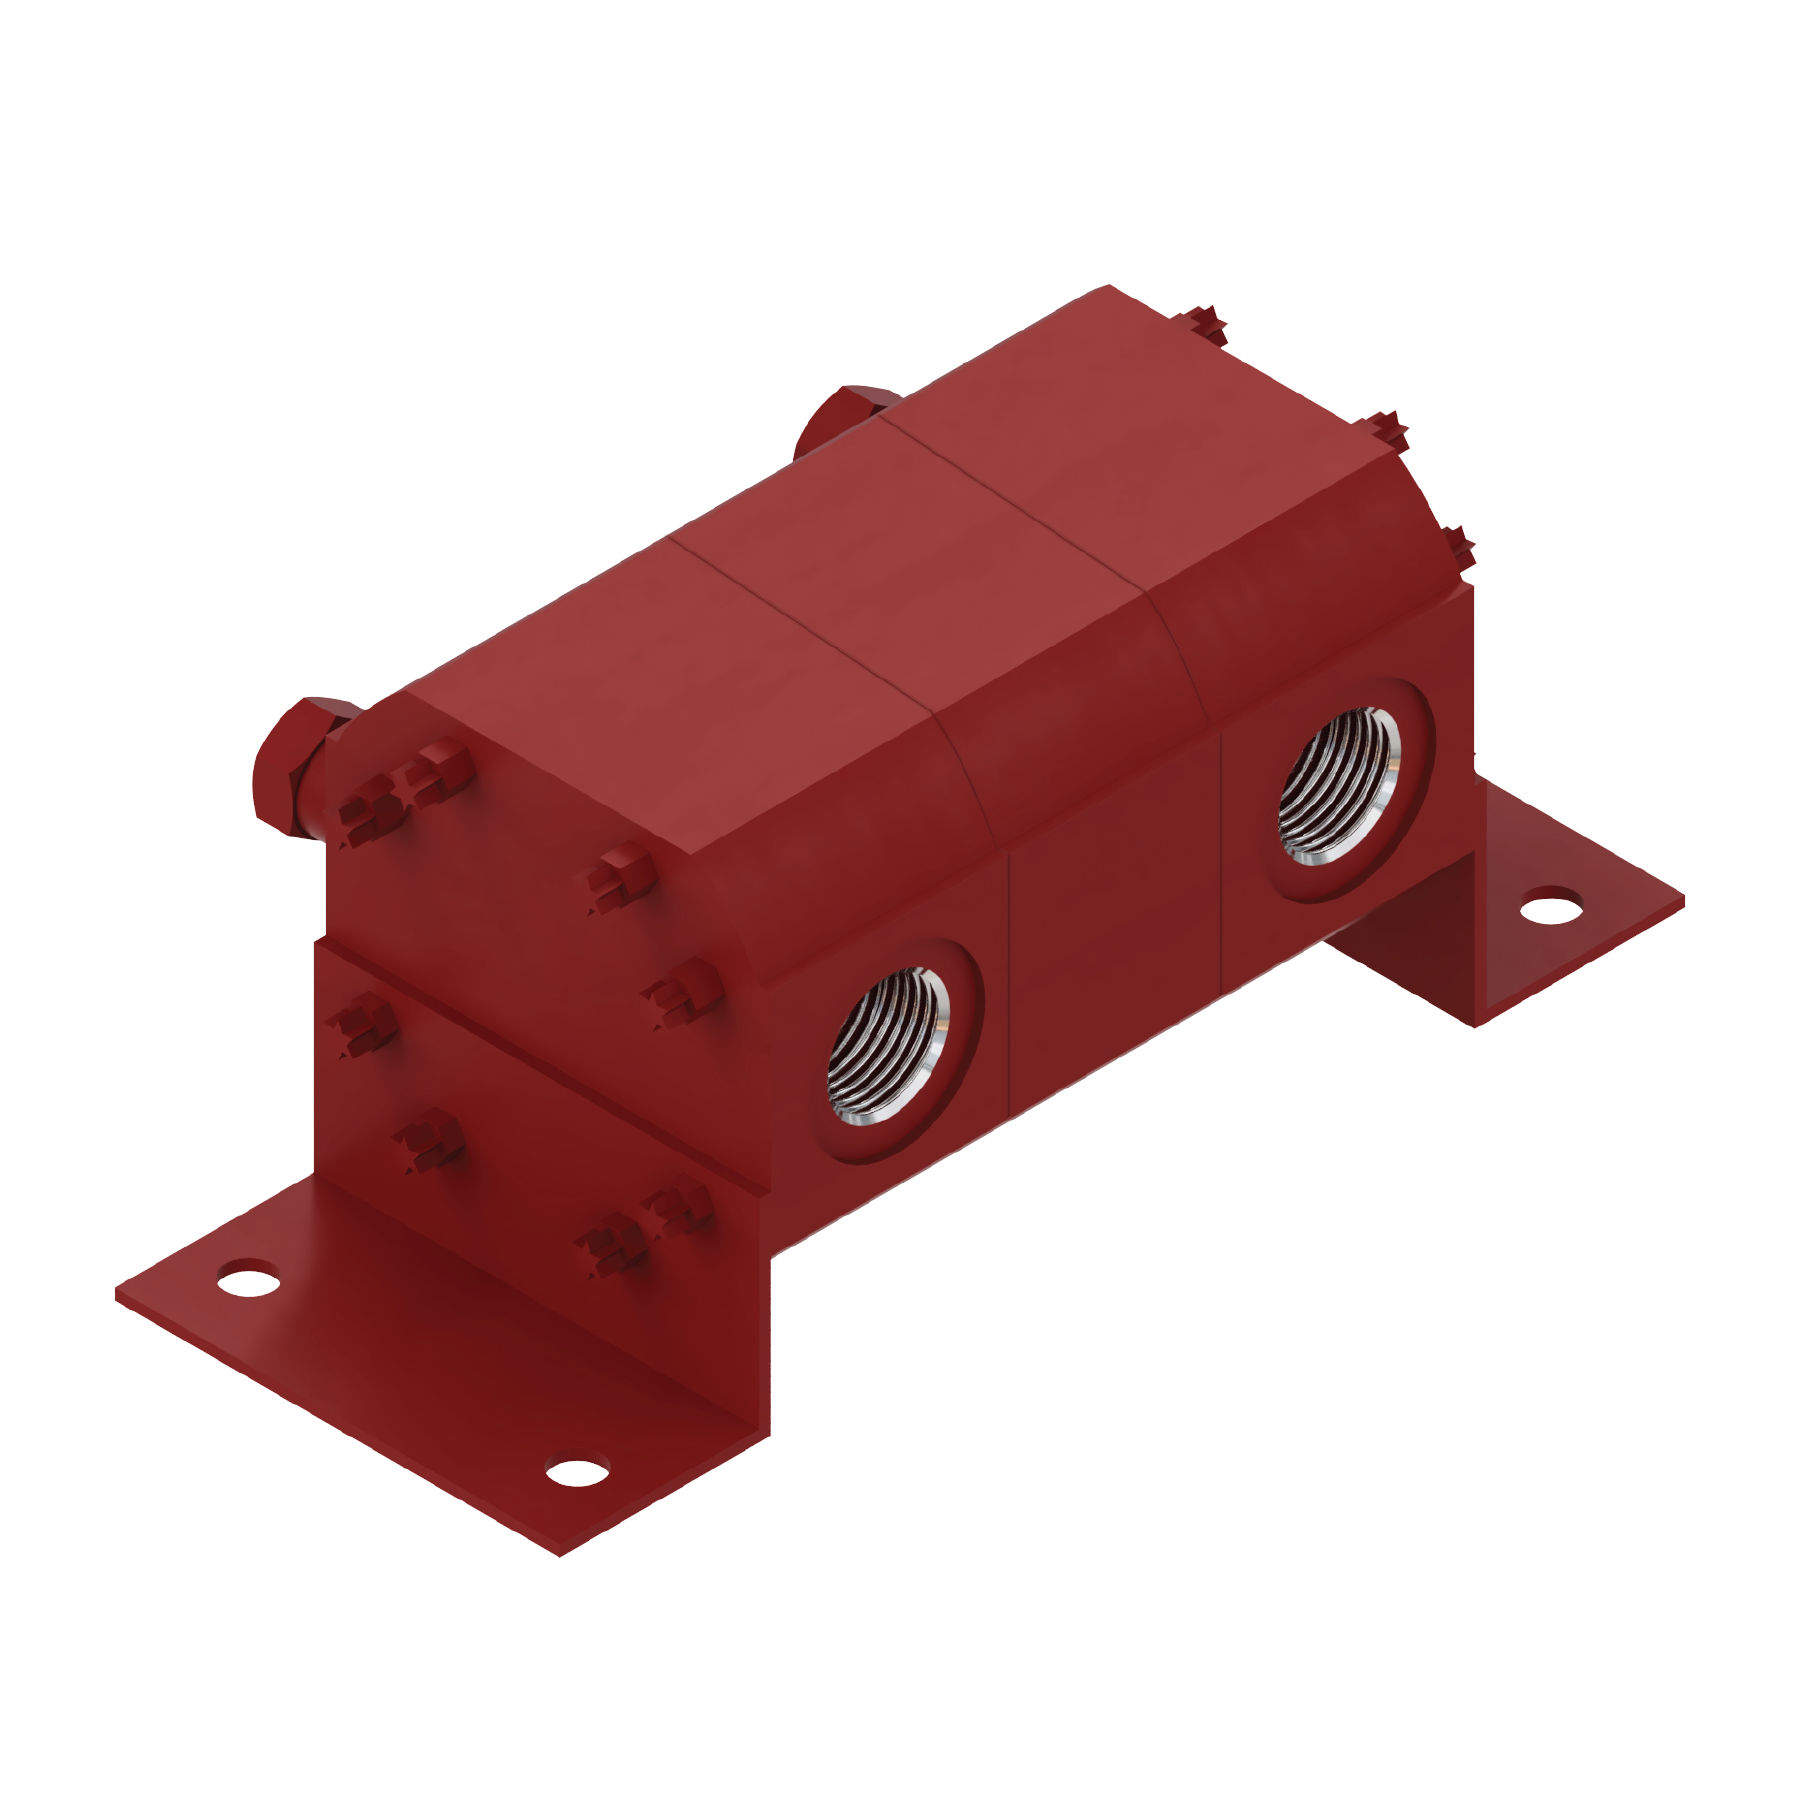 Rotary gear flow dividers – DR 1-2 / 2-2